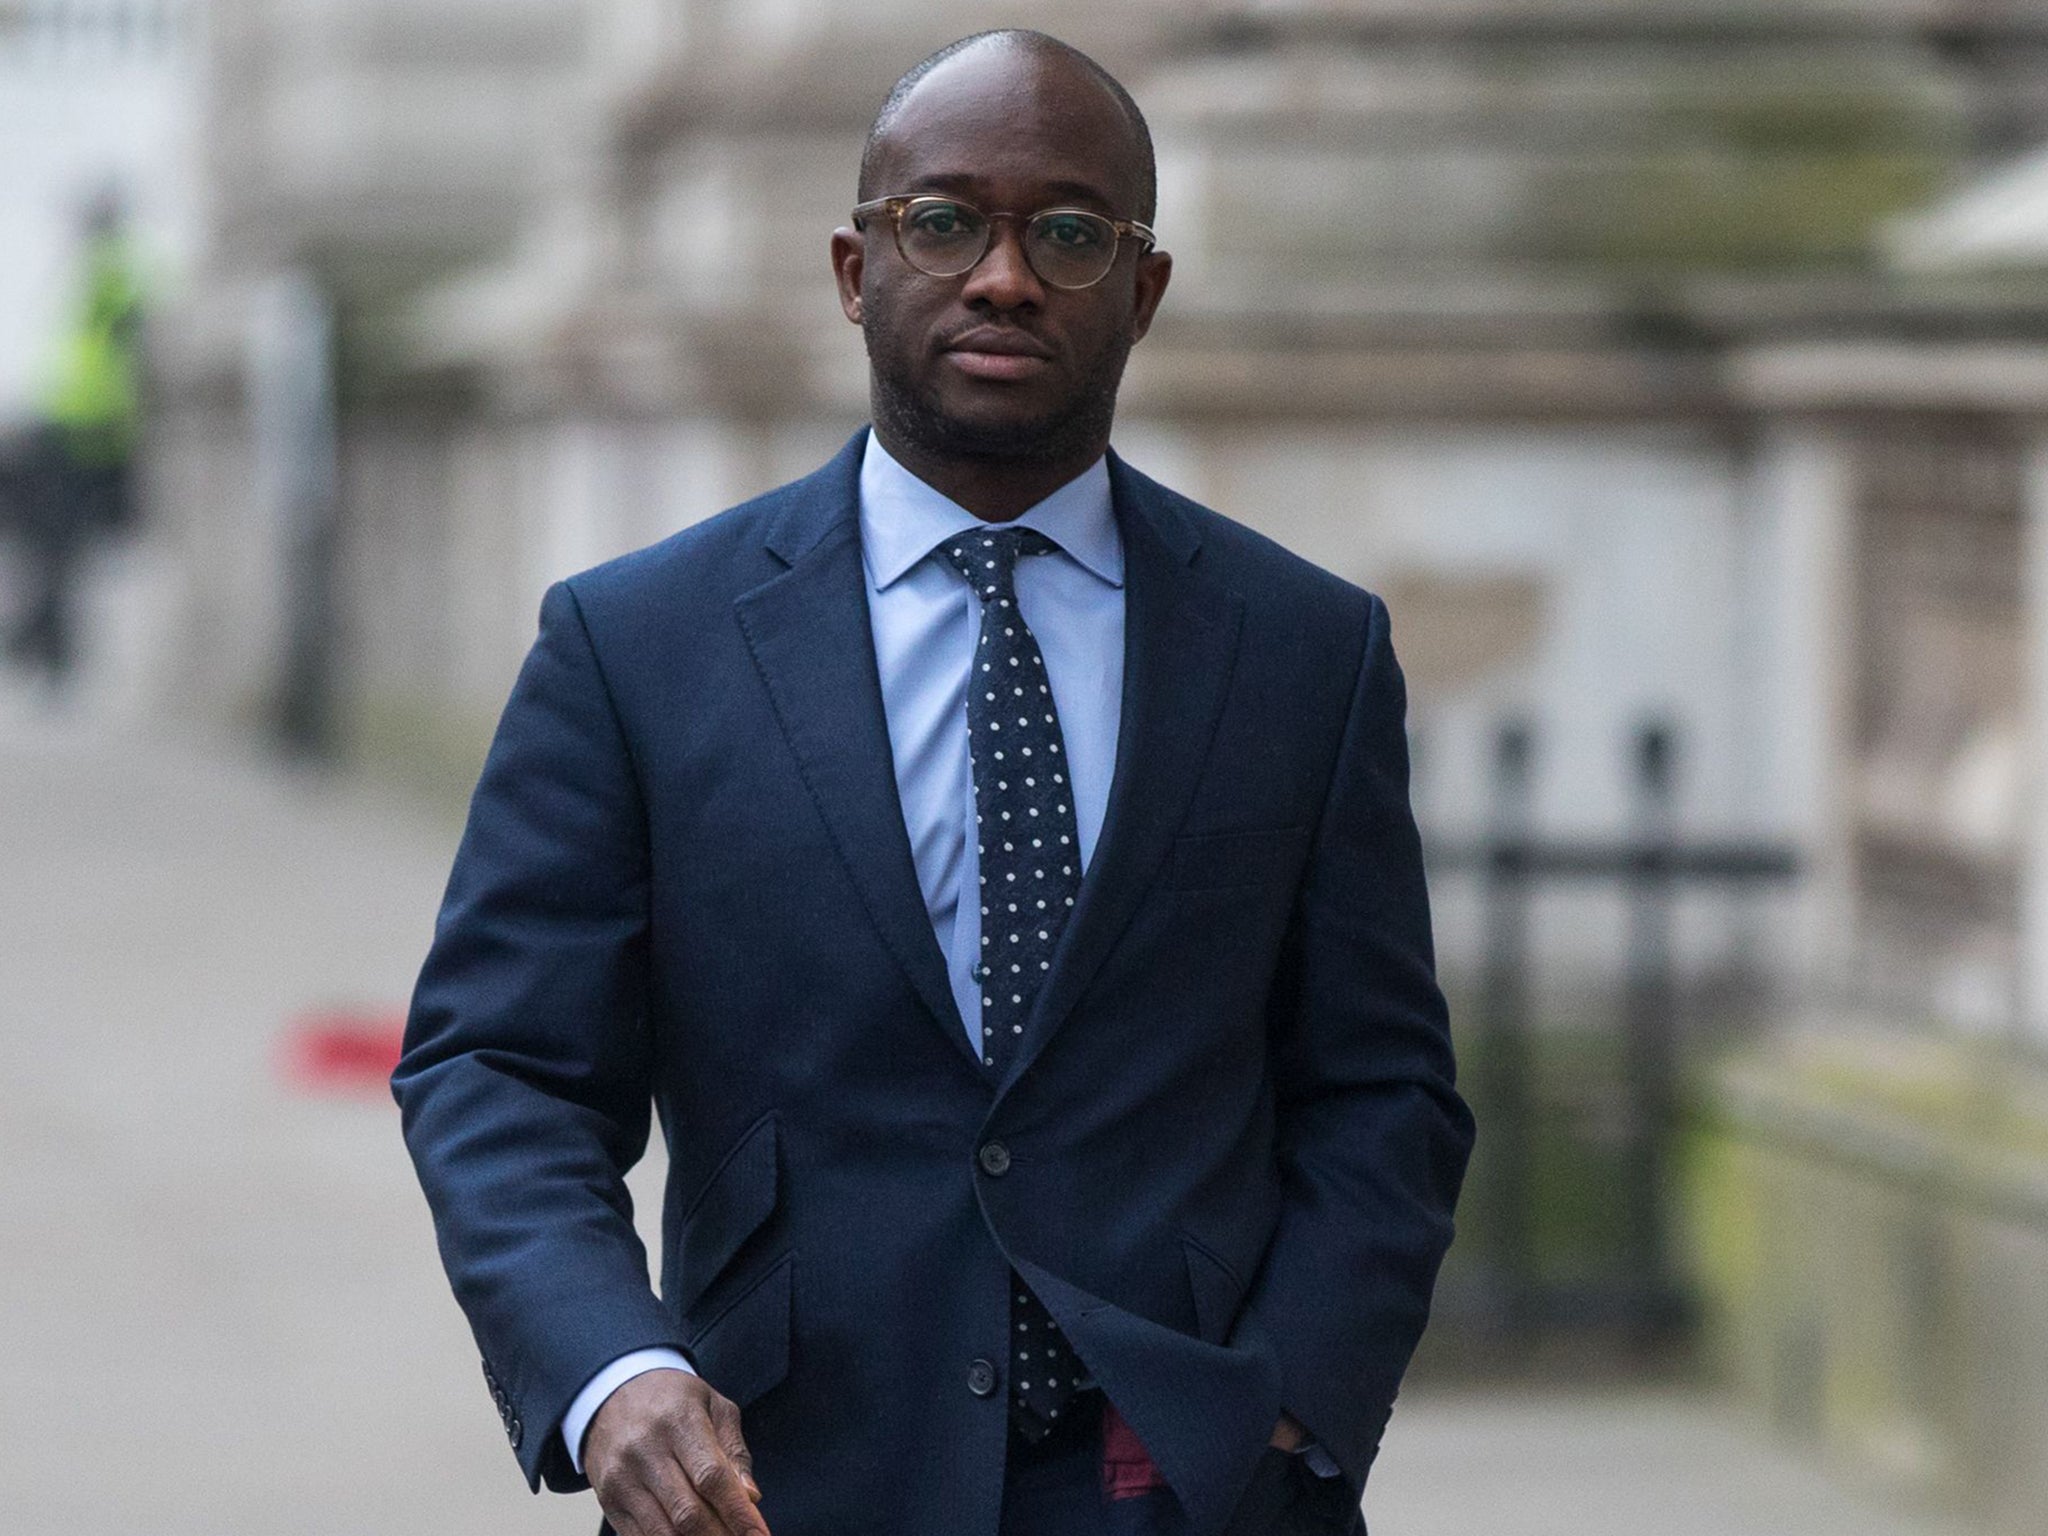 Sam Gyimah was told that a King’s College London academic was reported